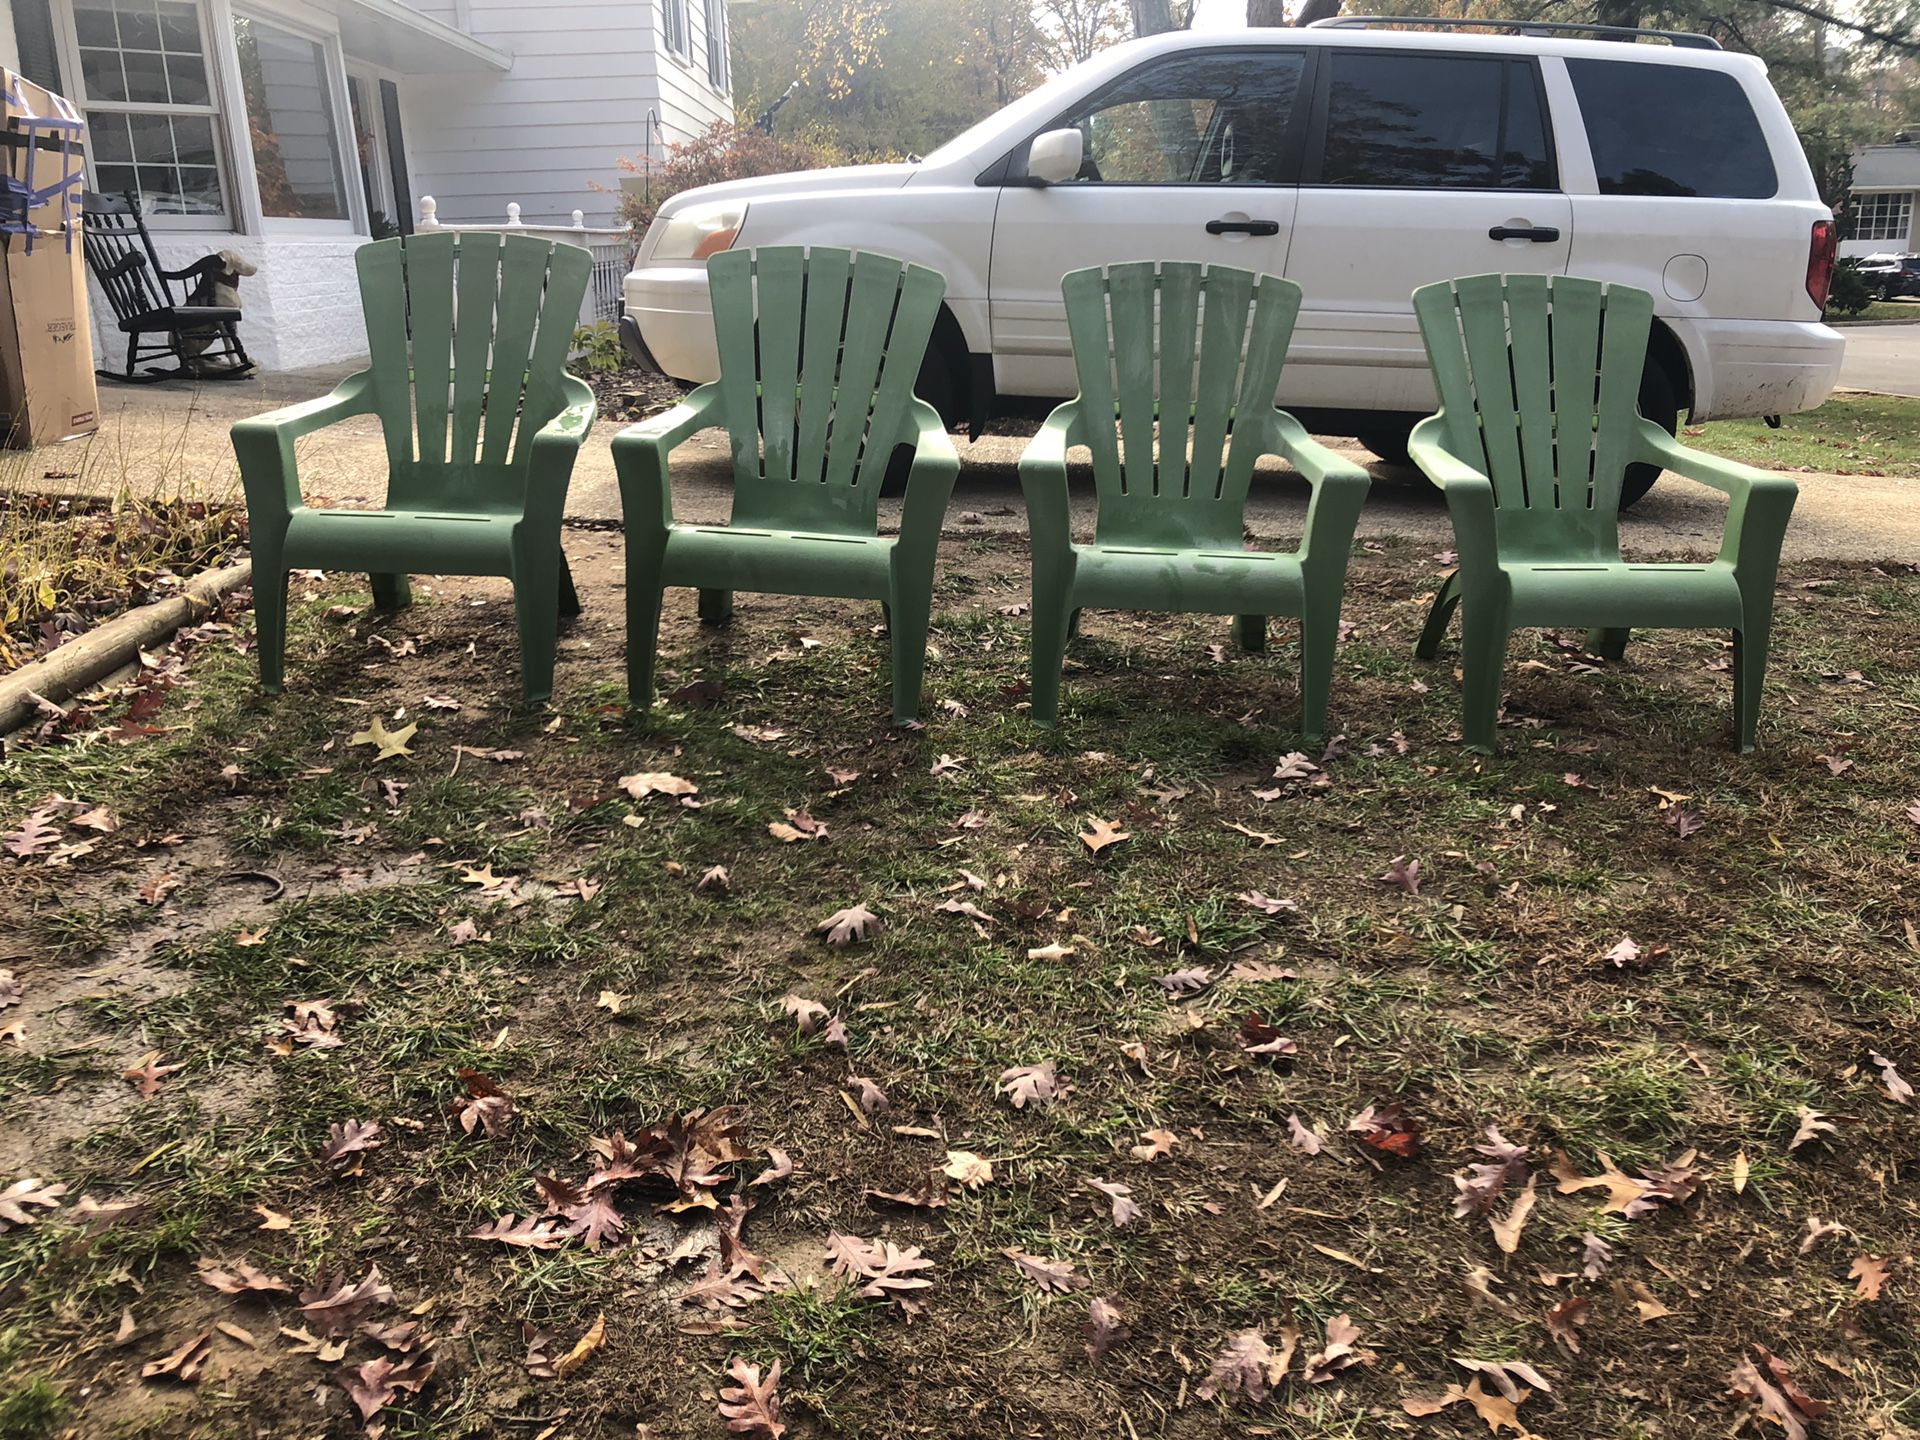 4 outdoor lawn chairs